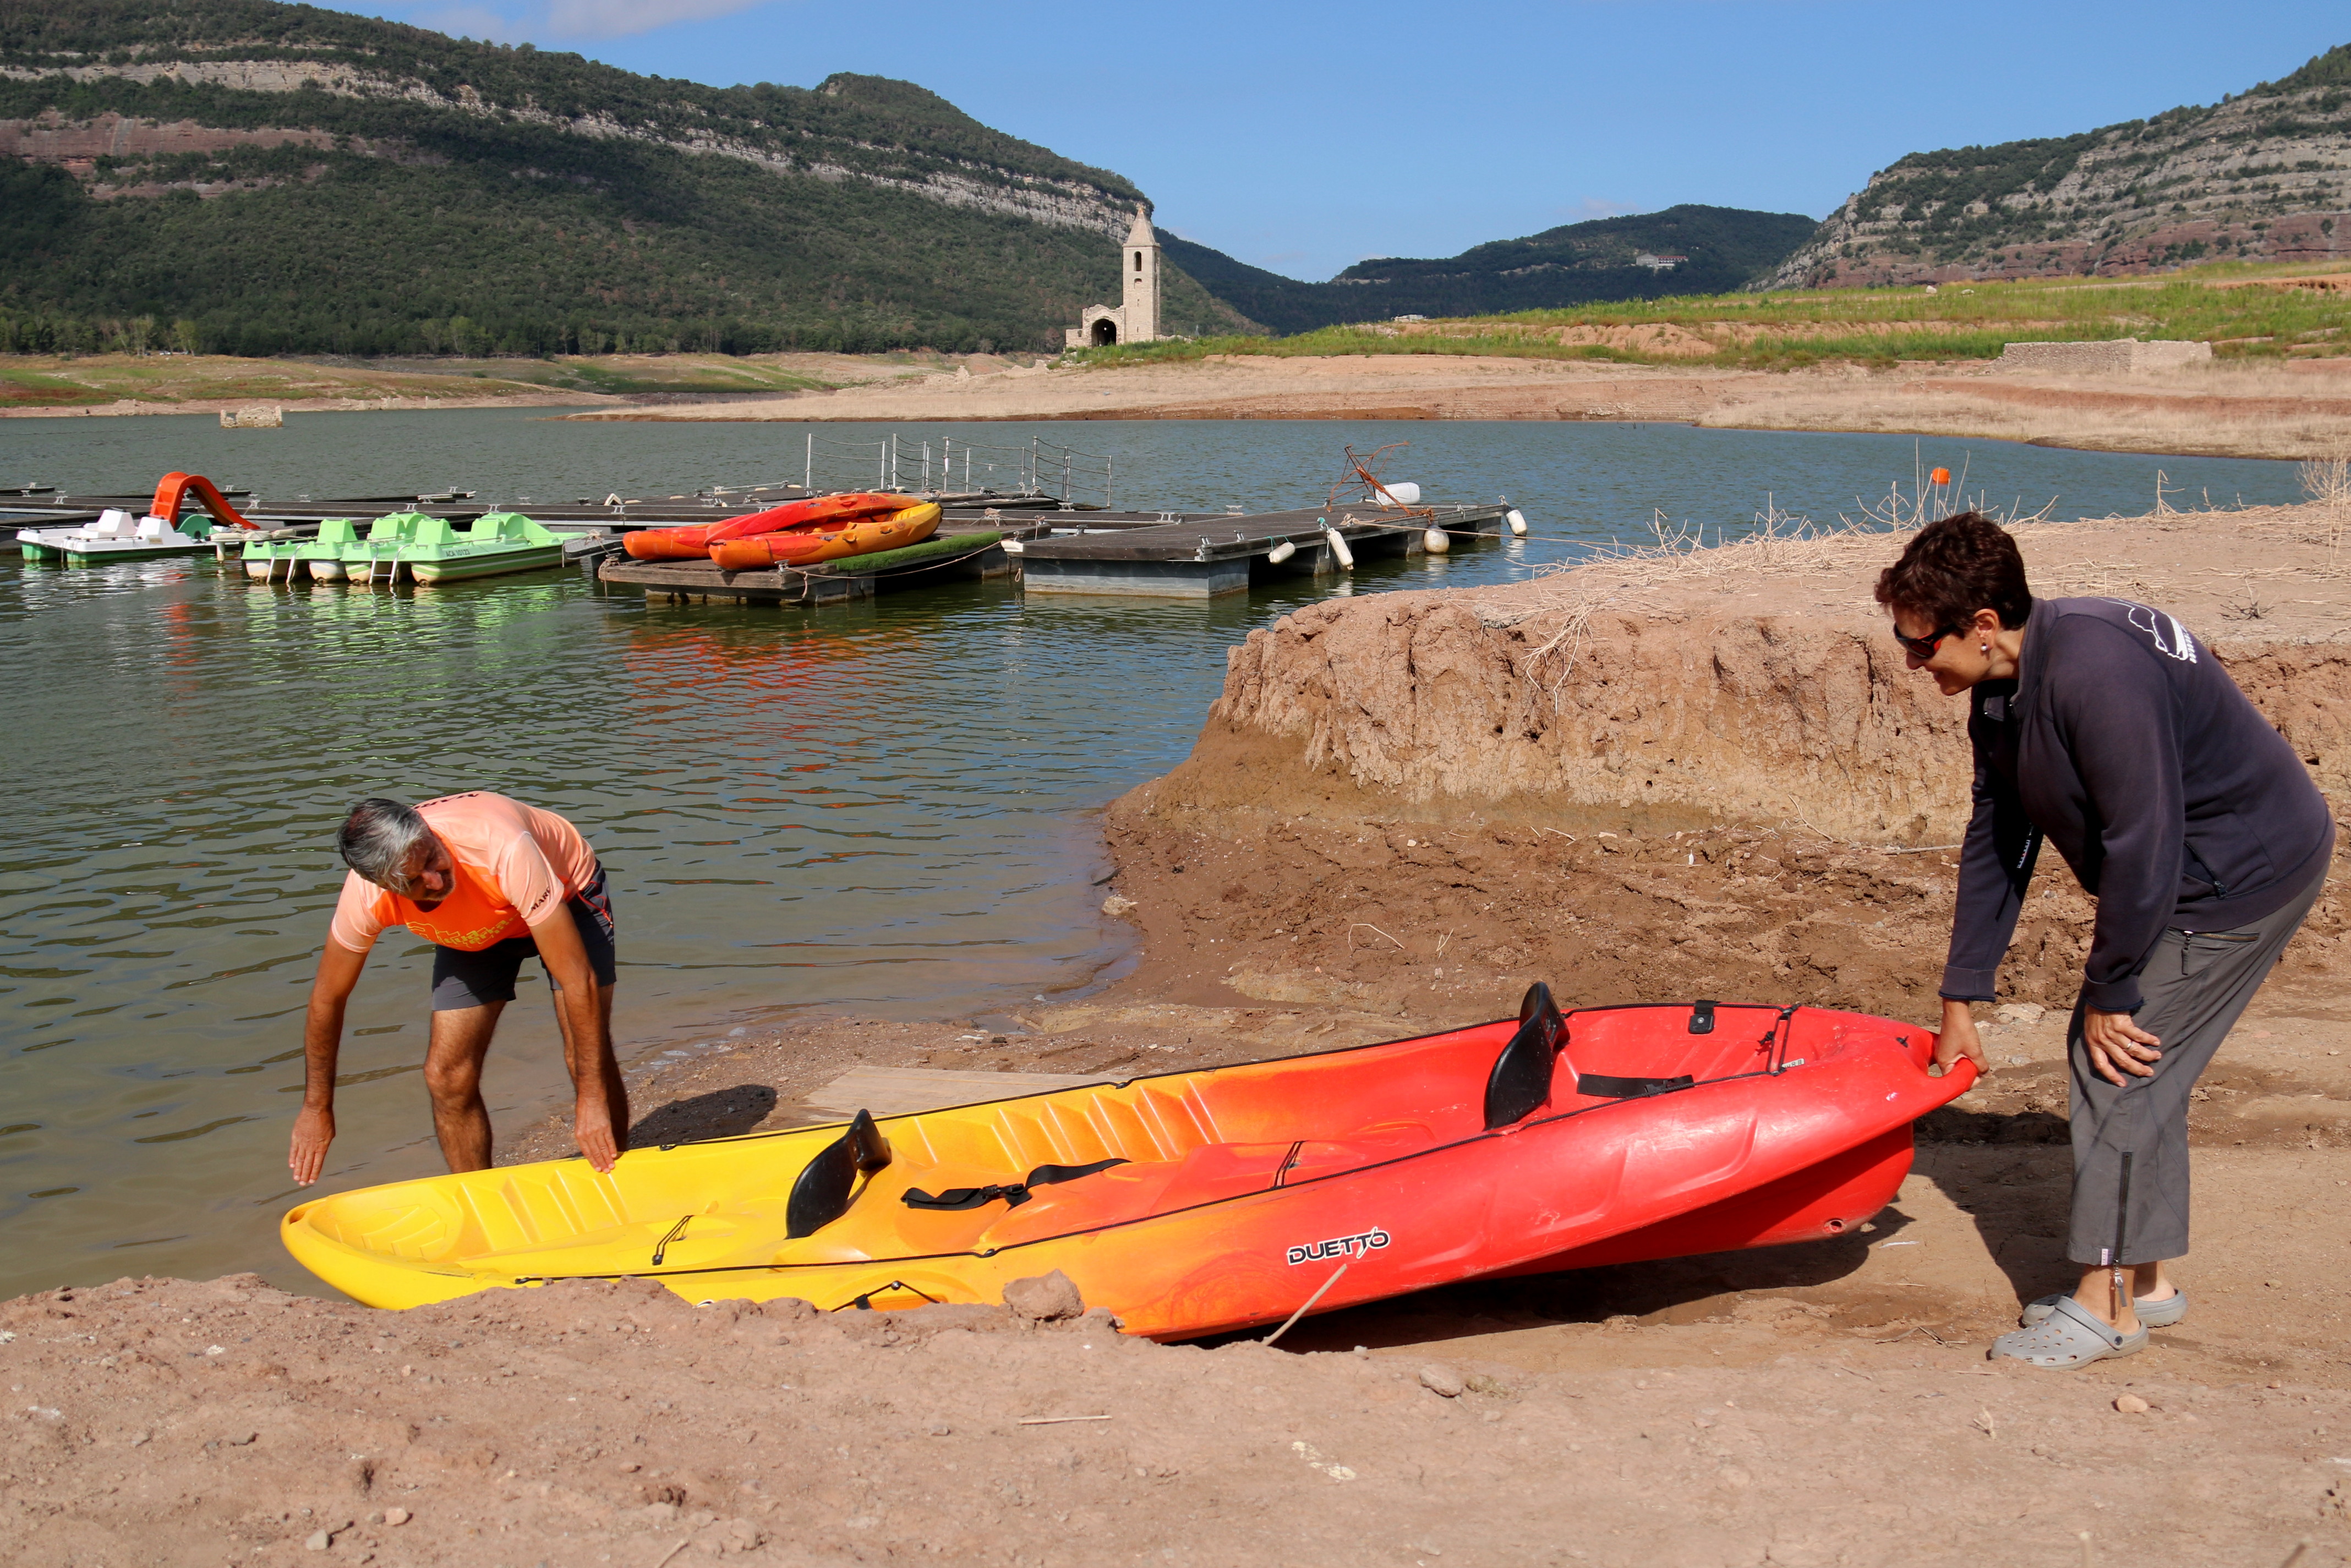 A kayak in the visibly drought-stricken Sau reservoir in central Catalonia